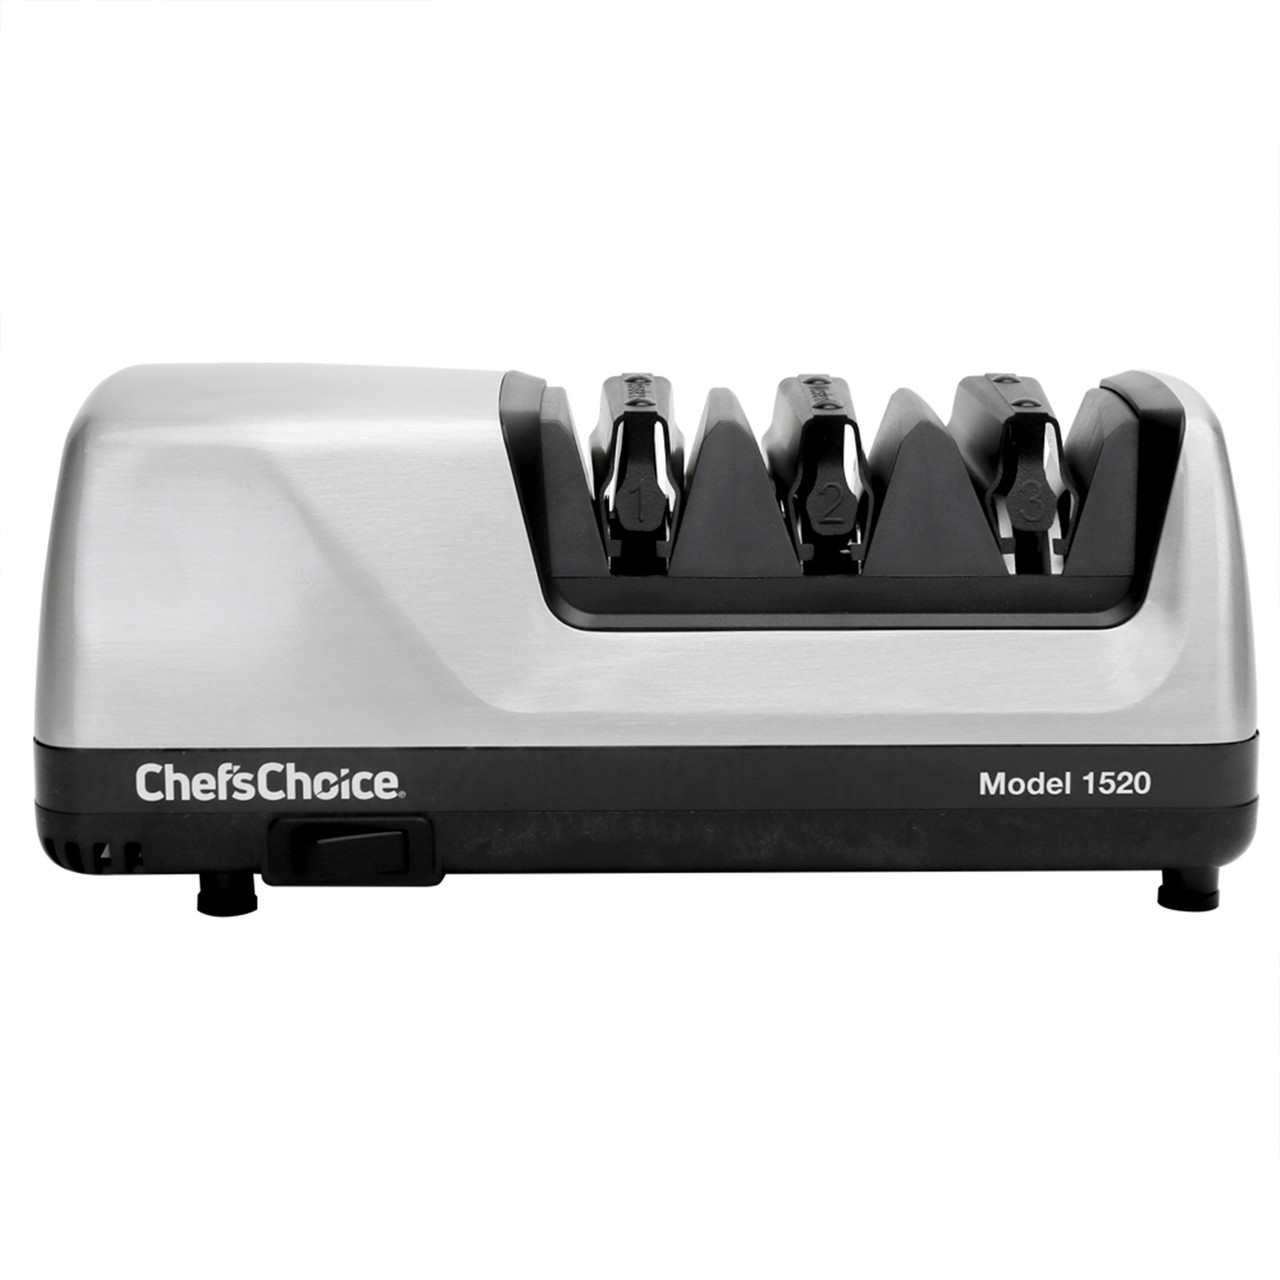  Chef'sChoice 1520 Electric Knife Sharpener for